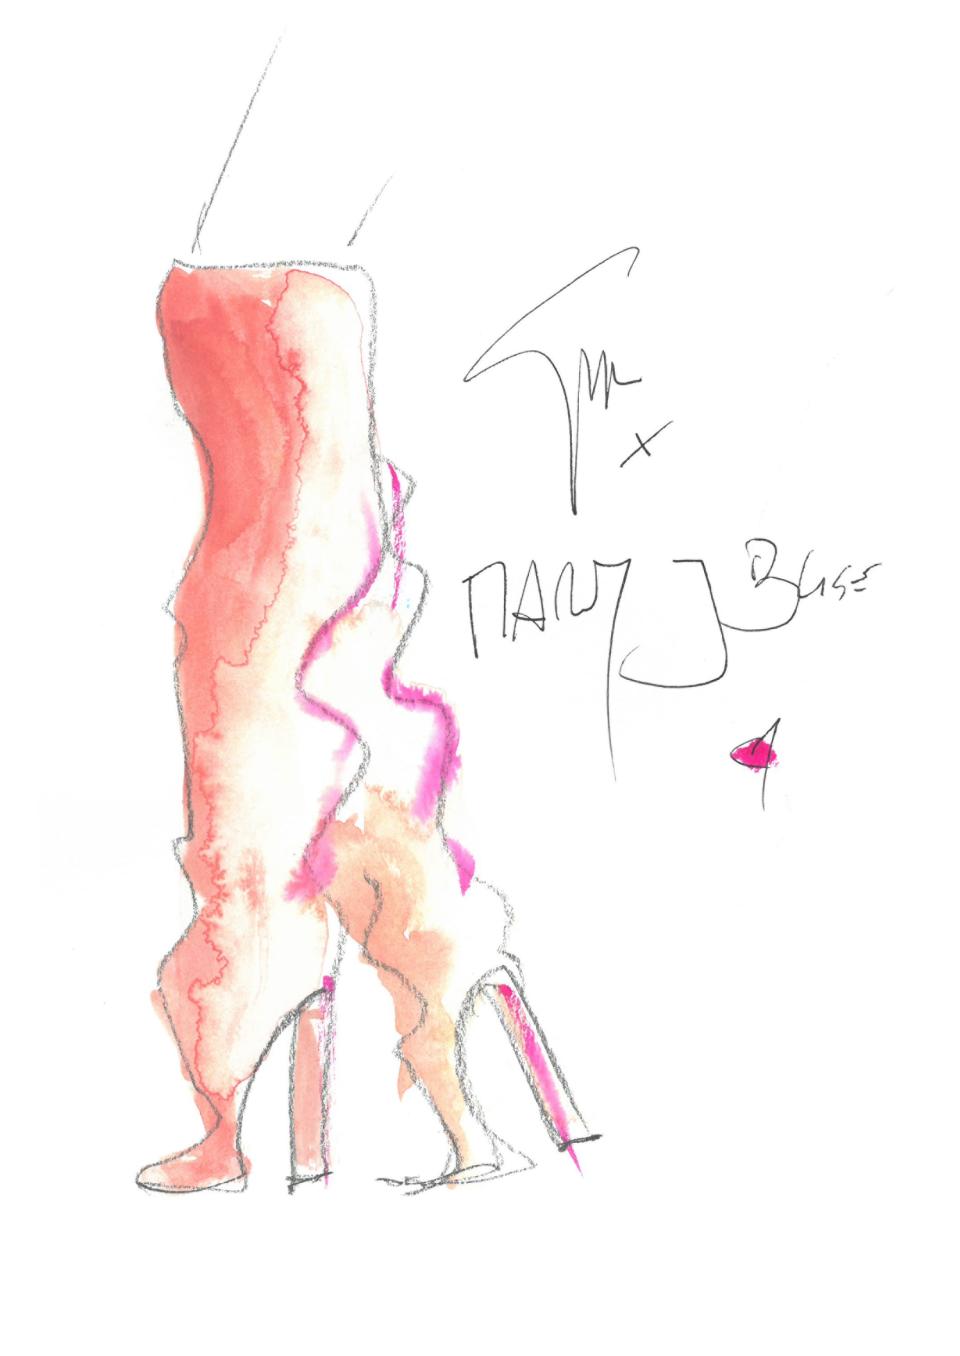 A sketch of the Mary J. Blige and Giuseppe Zanotti collaboration boot